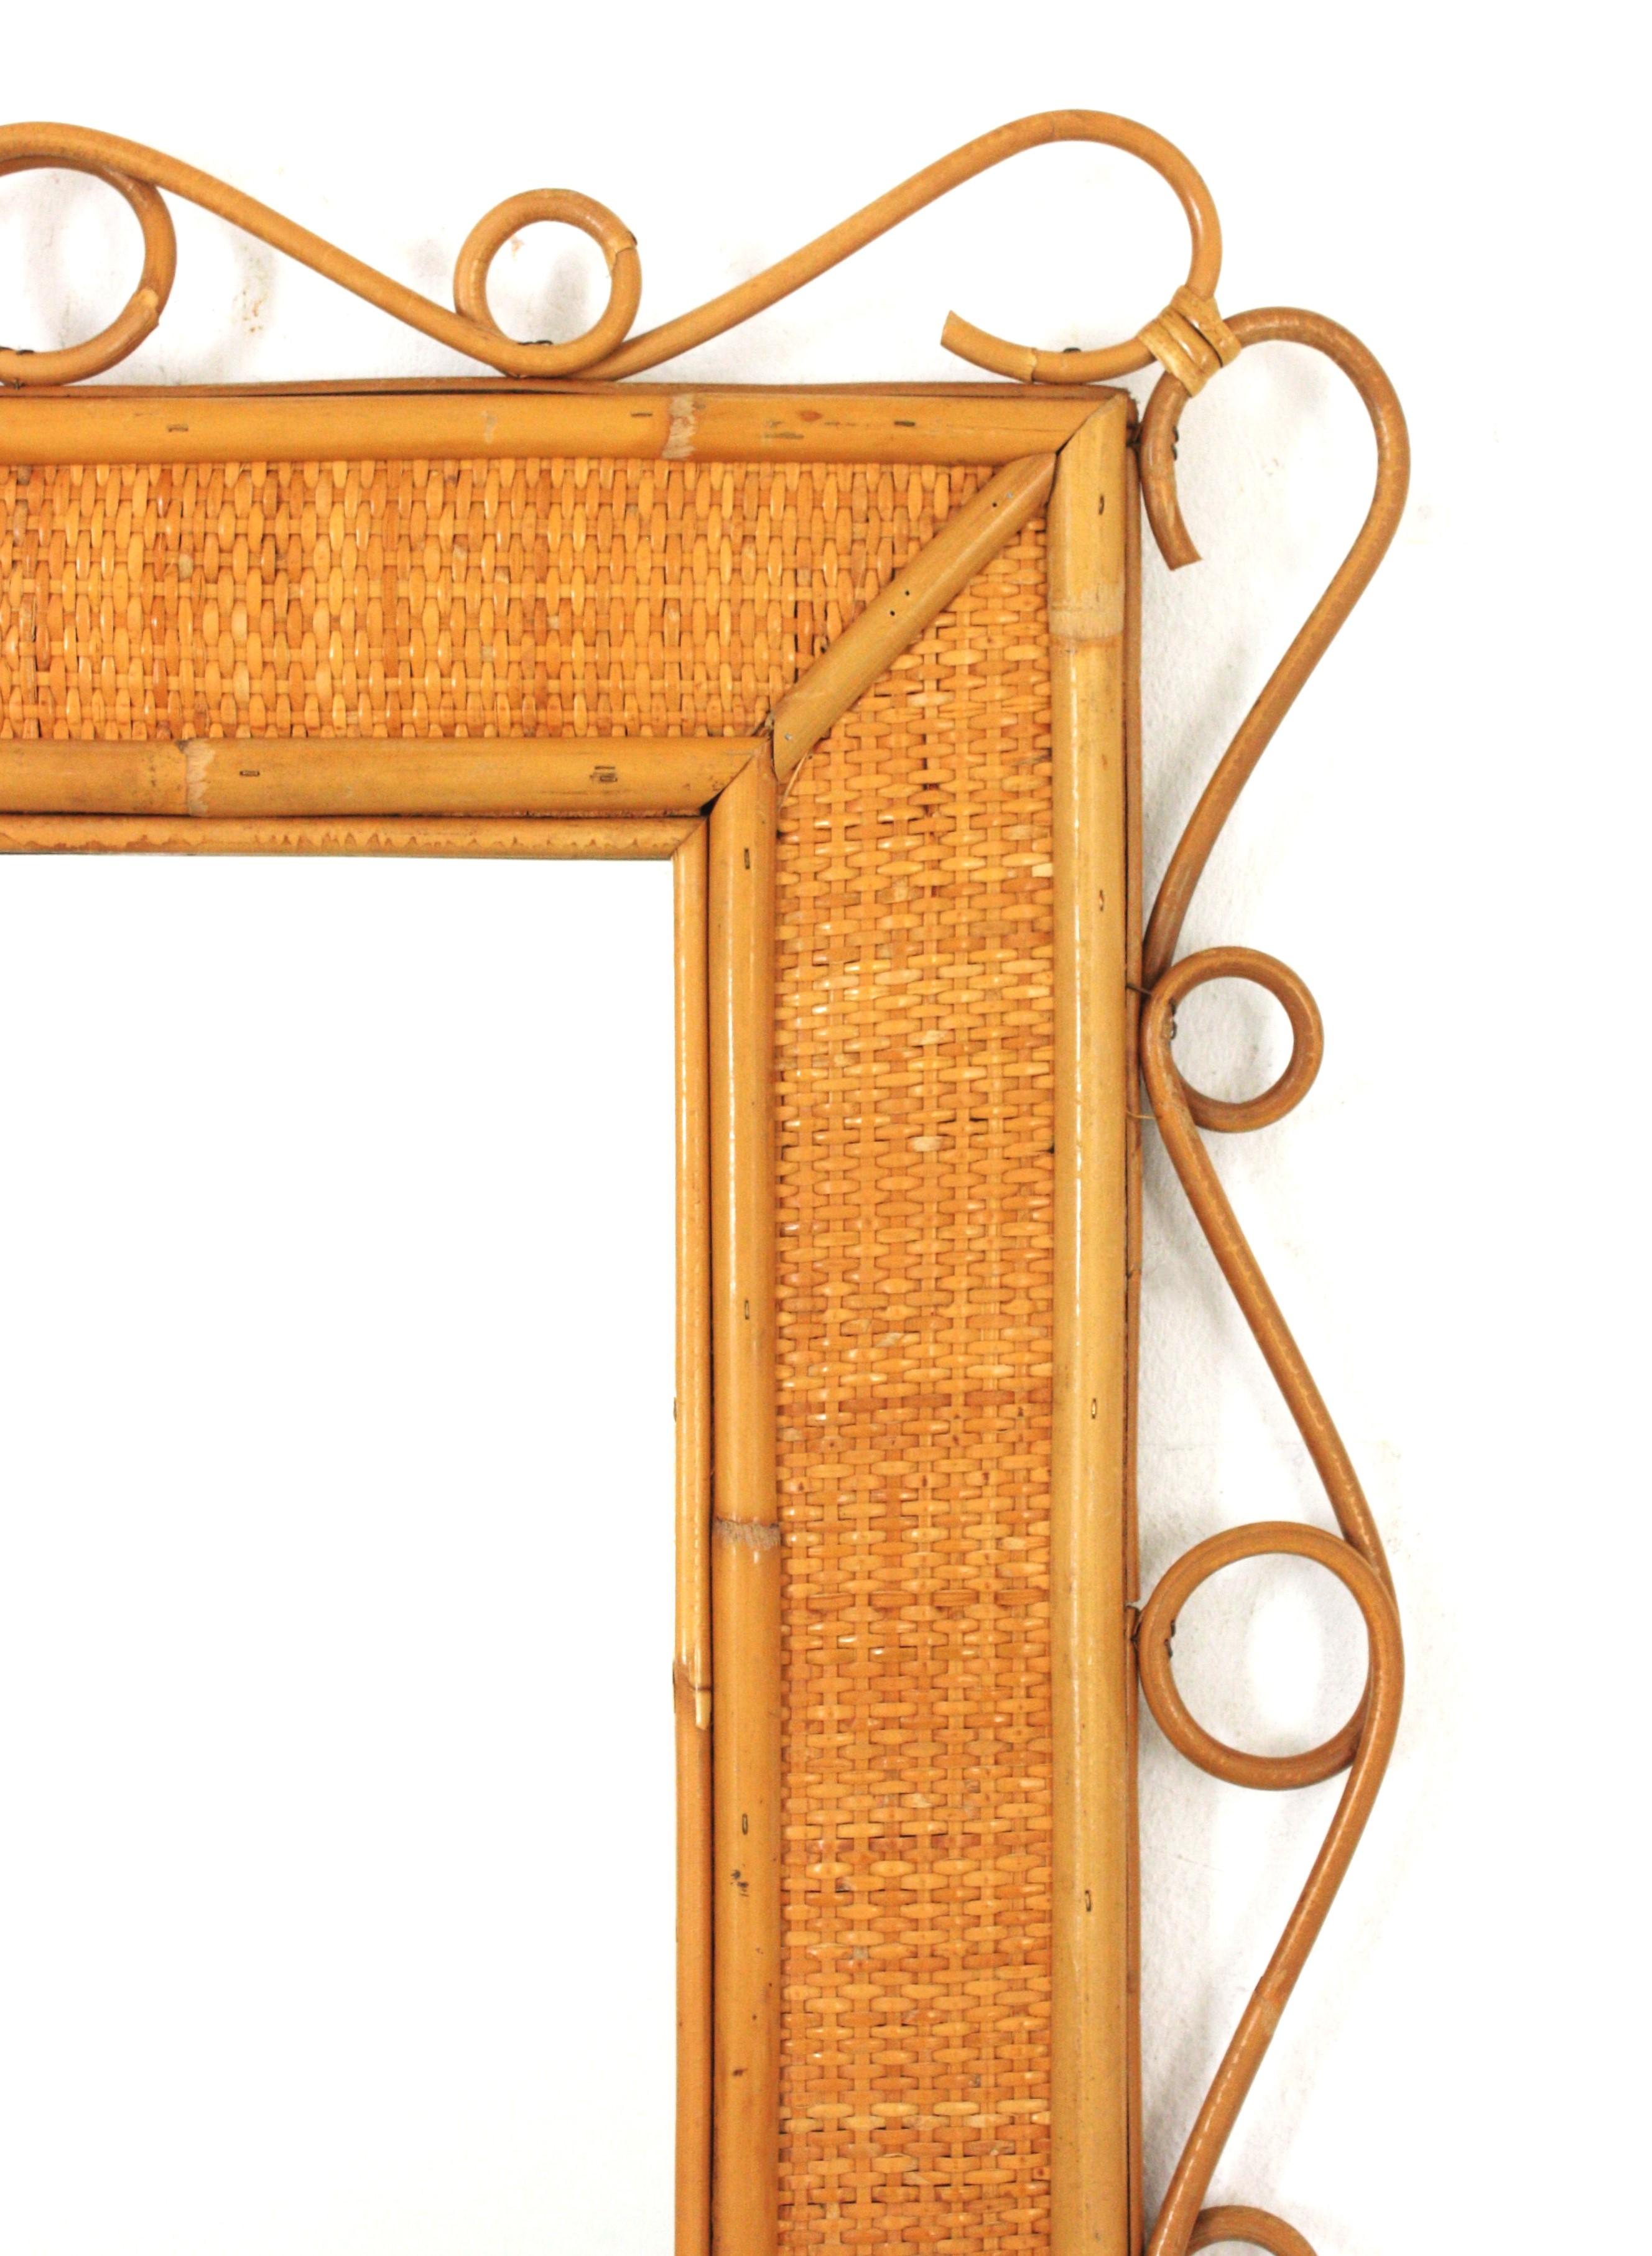 20th Century Rattan Rectangular Mirror with Scroll Motif, Franco Albini Style For Sale